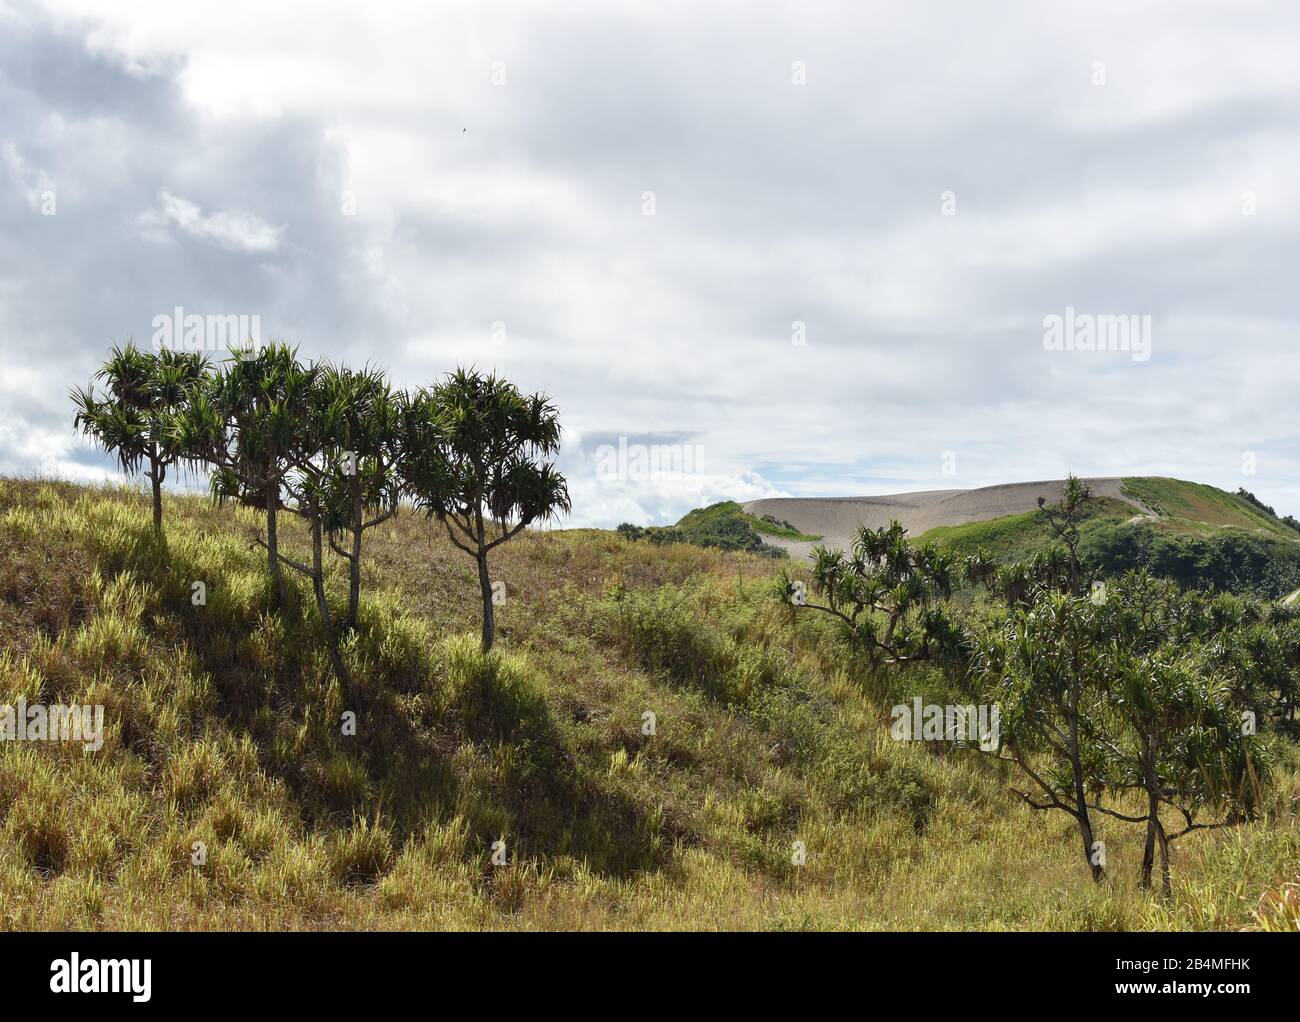 Trees and grass, with a huge dune behind them, against a cloudy sky, in Fiji's Sigatoka Sand Dunes National Park Stock Photo